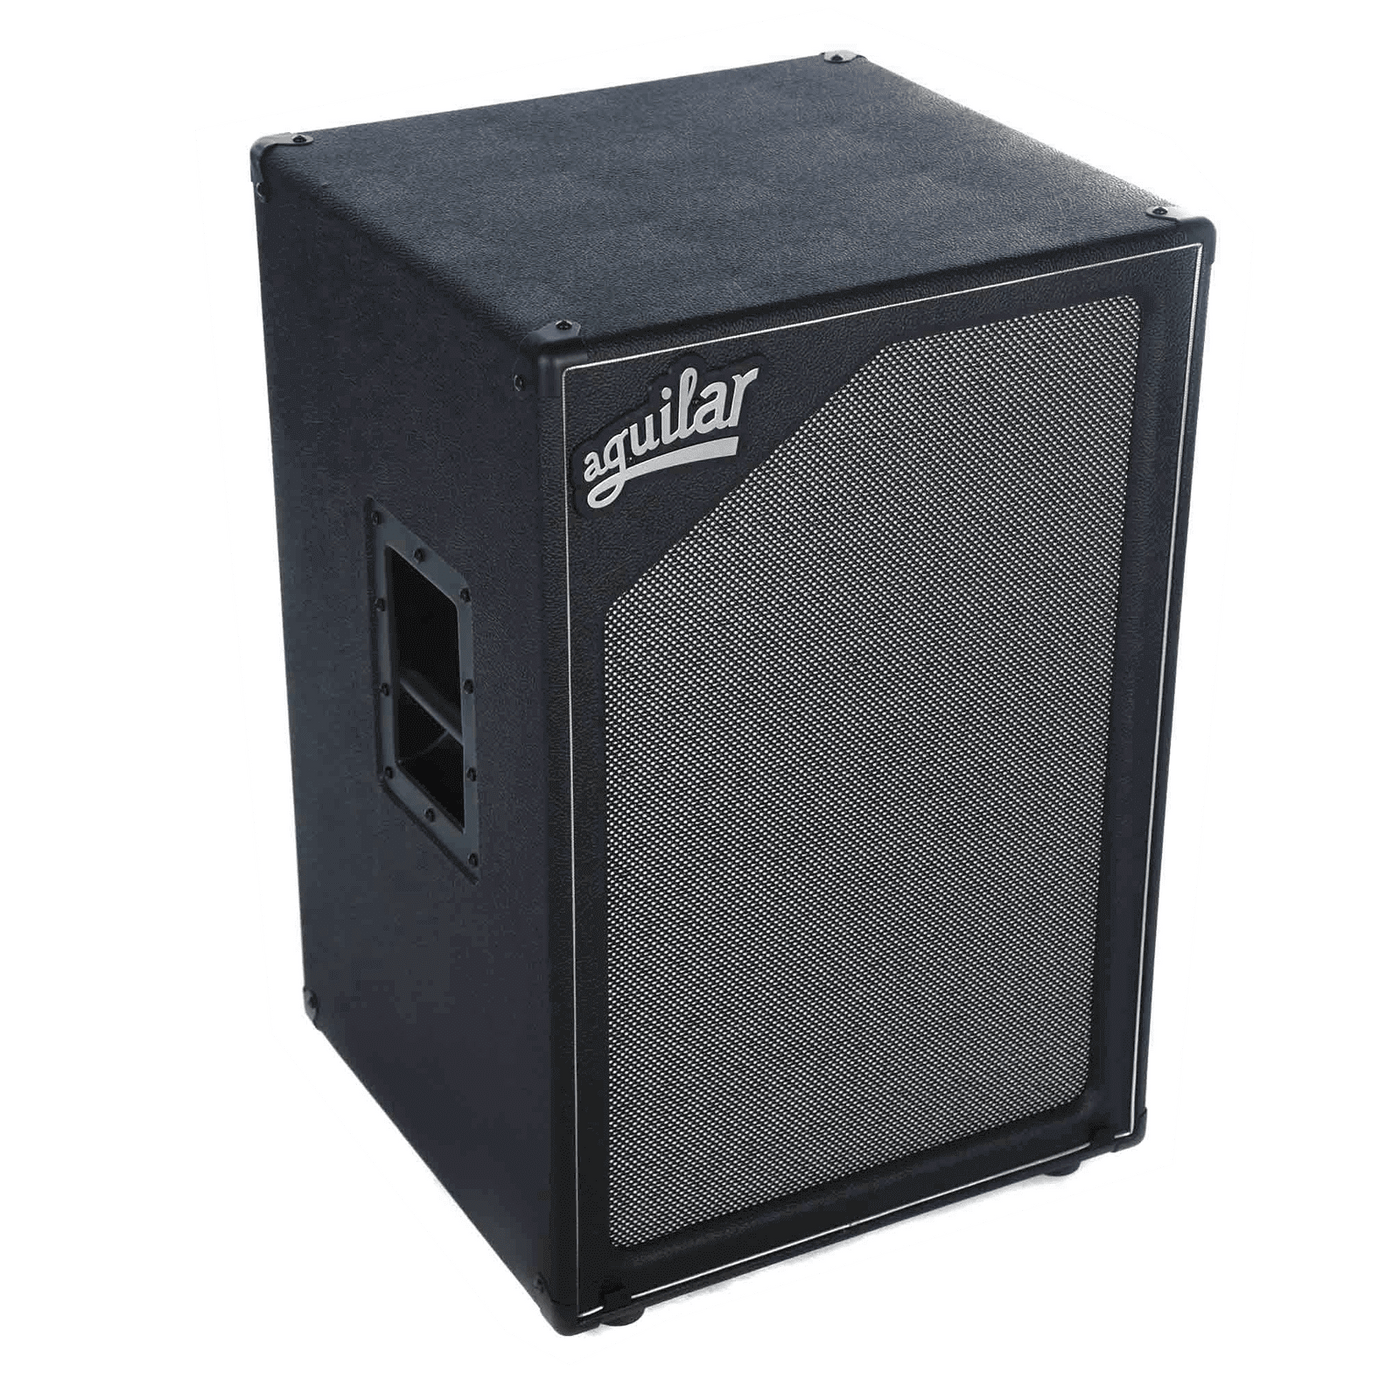 Aguilar SL 212 - The SL 212 offers an unprecedented balance of performance and weight. At only 45 lbs. (20.41 kg), this 4 ohm cabinet handles 500 watts RMS. With a frequency response of 37 Hz–16 kHz, the SL 212 provides the deep lows, articulate midrange